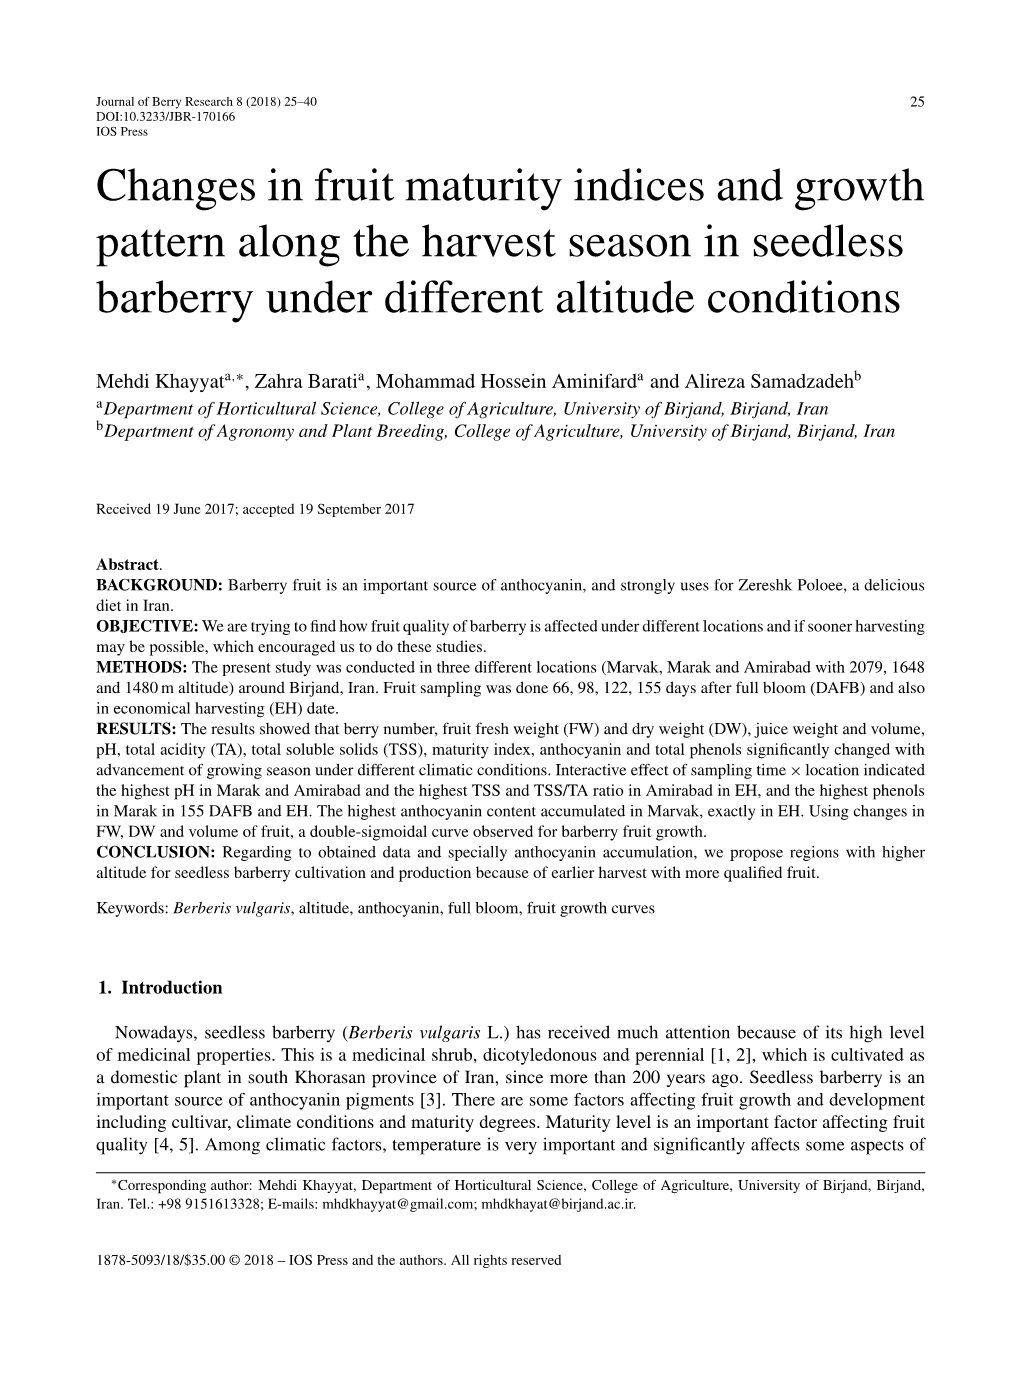 Changes in Fruit Maturity Indices and Growth Pattern Along the Harvest Season in Seedless Barberry Under Different Altitude Conditions